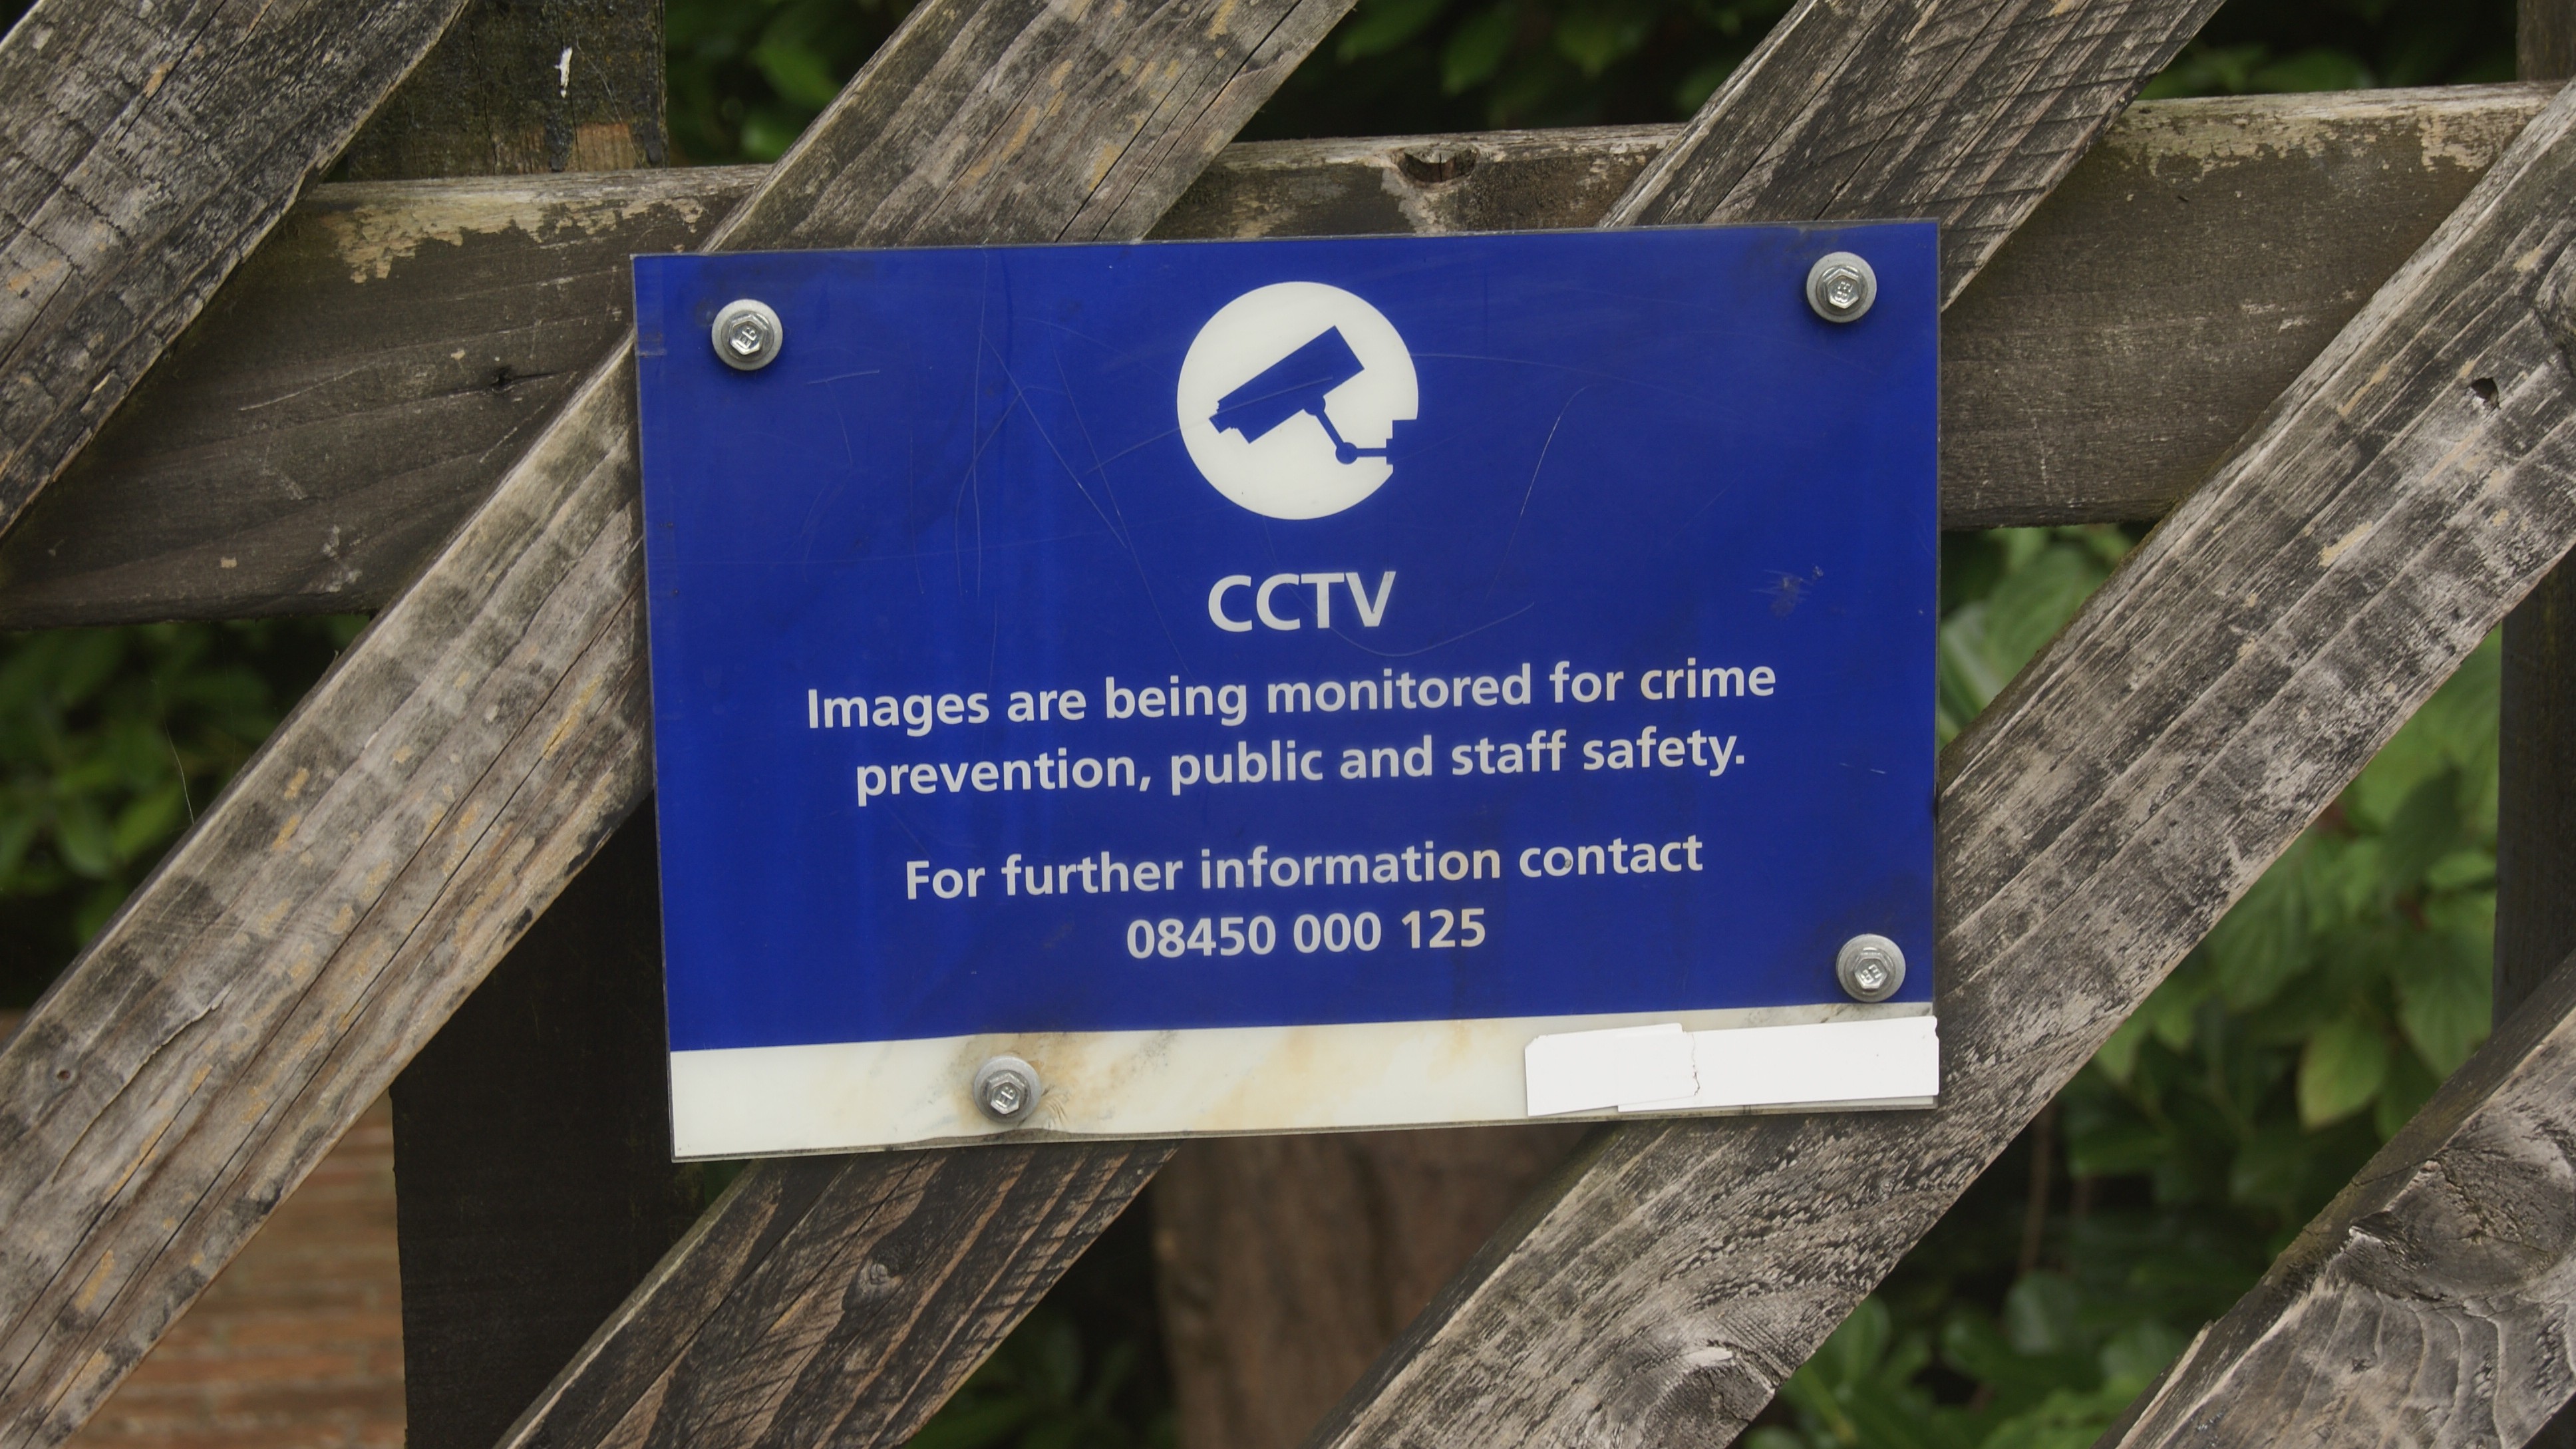 This images shows a sign warning that images are being recorded for safety